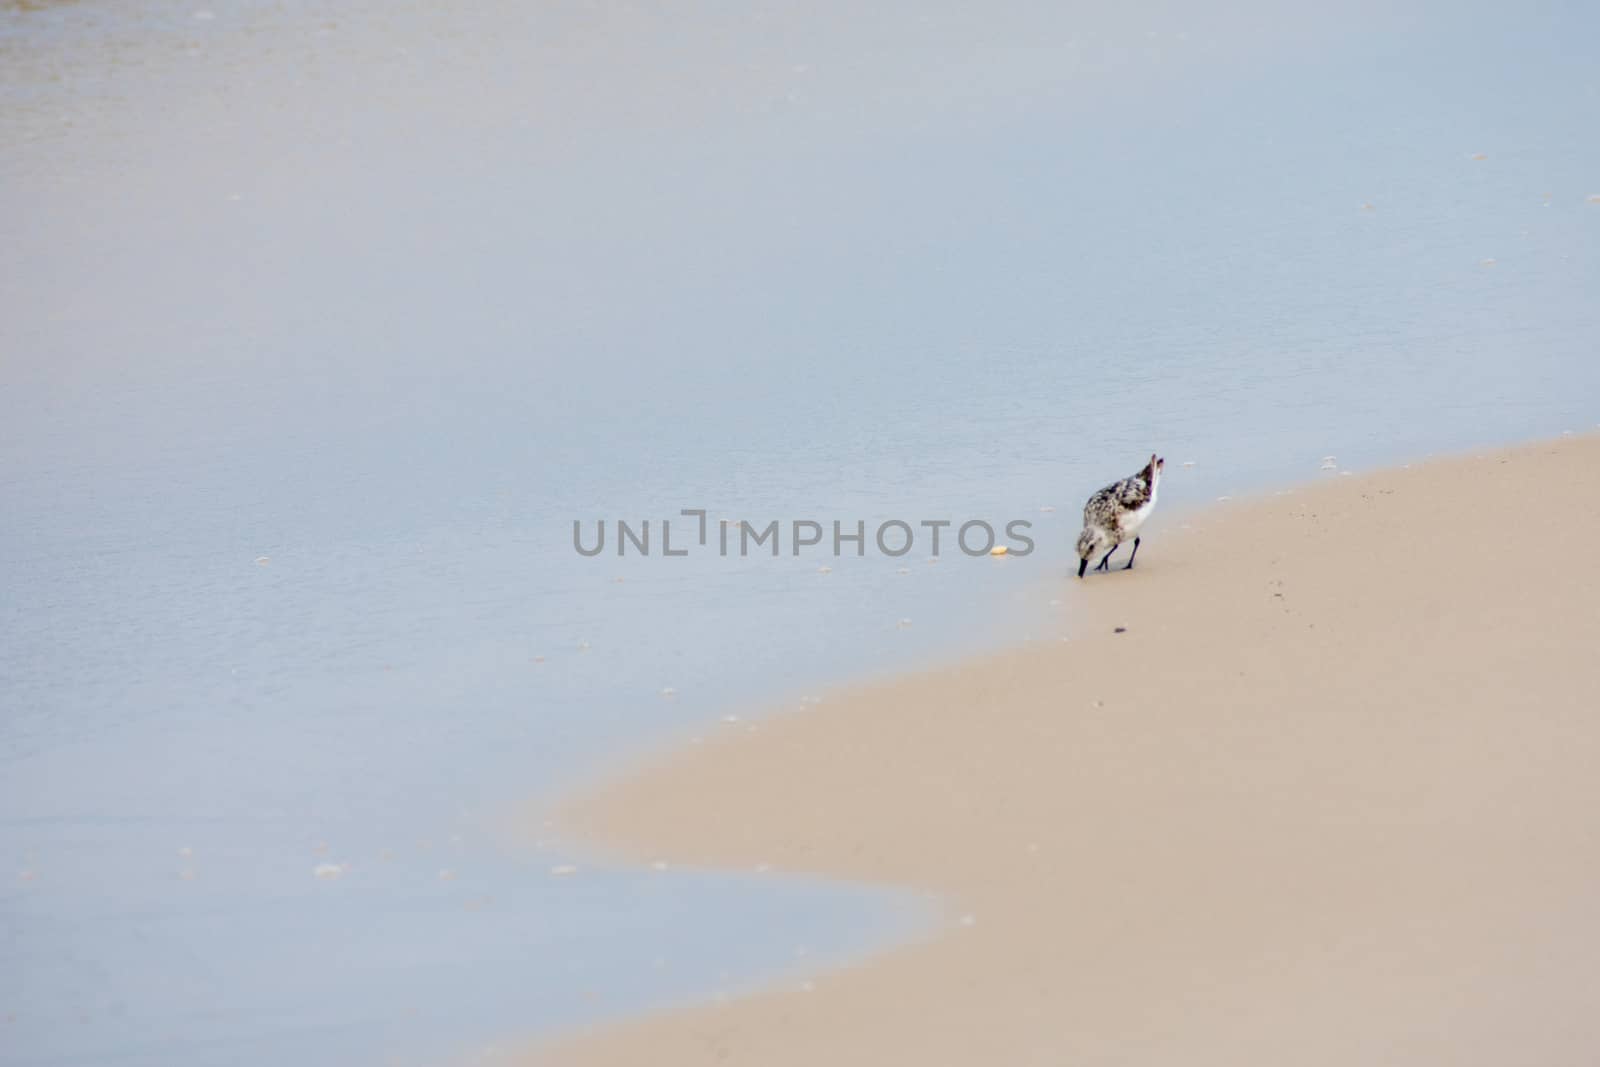 A Small Bird on a Beach Sticking Its Beak in the Sand in Search  by bju12290